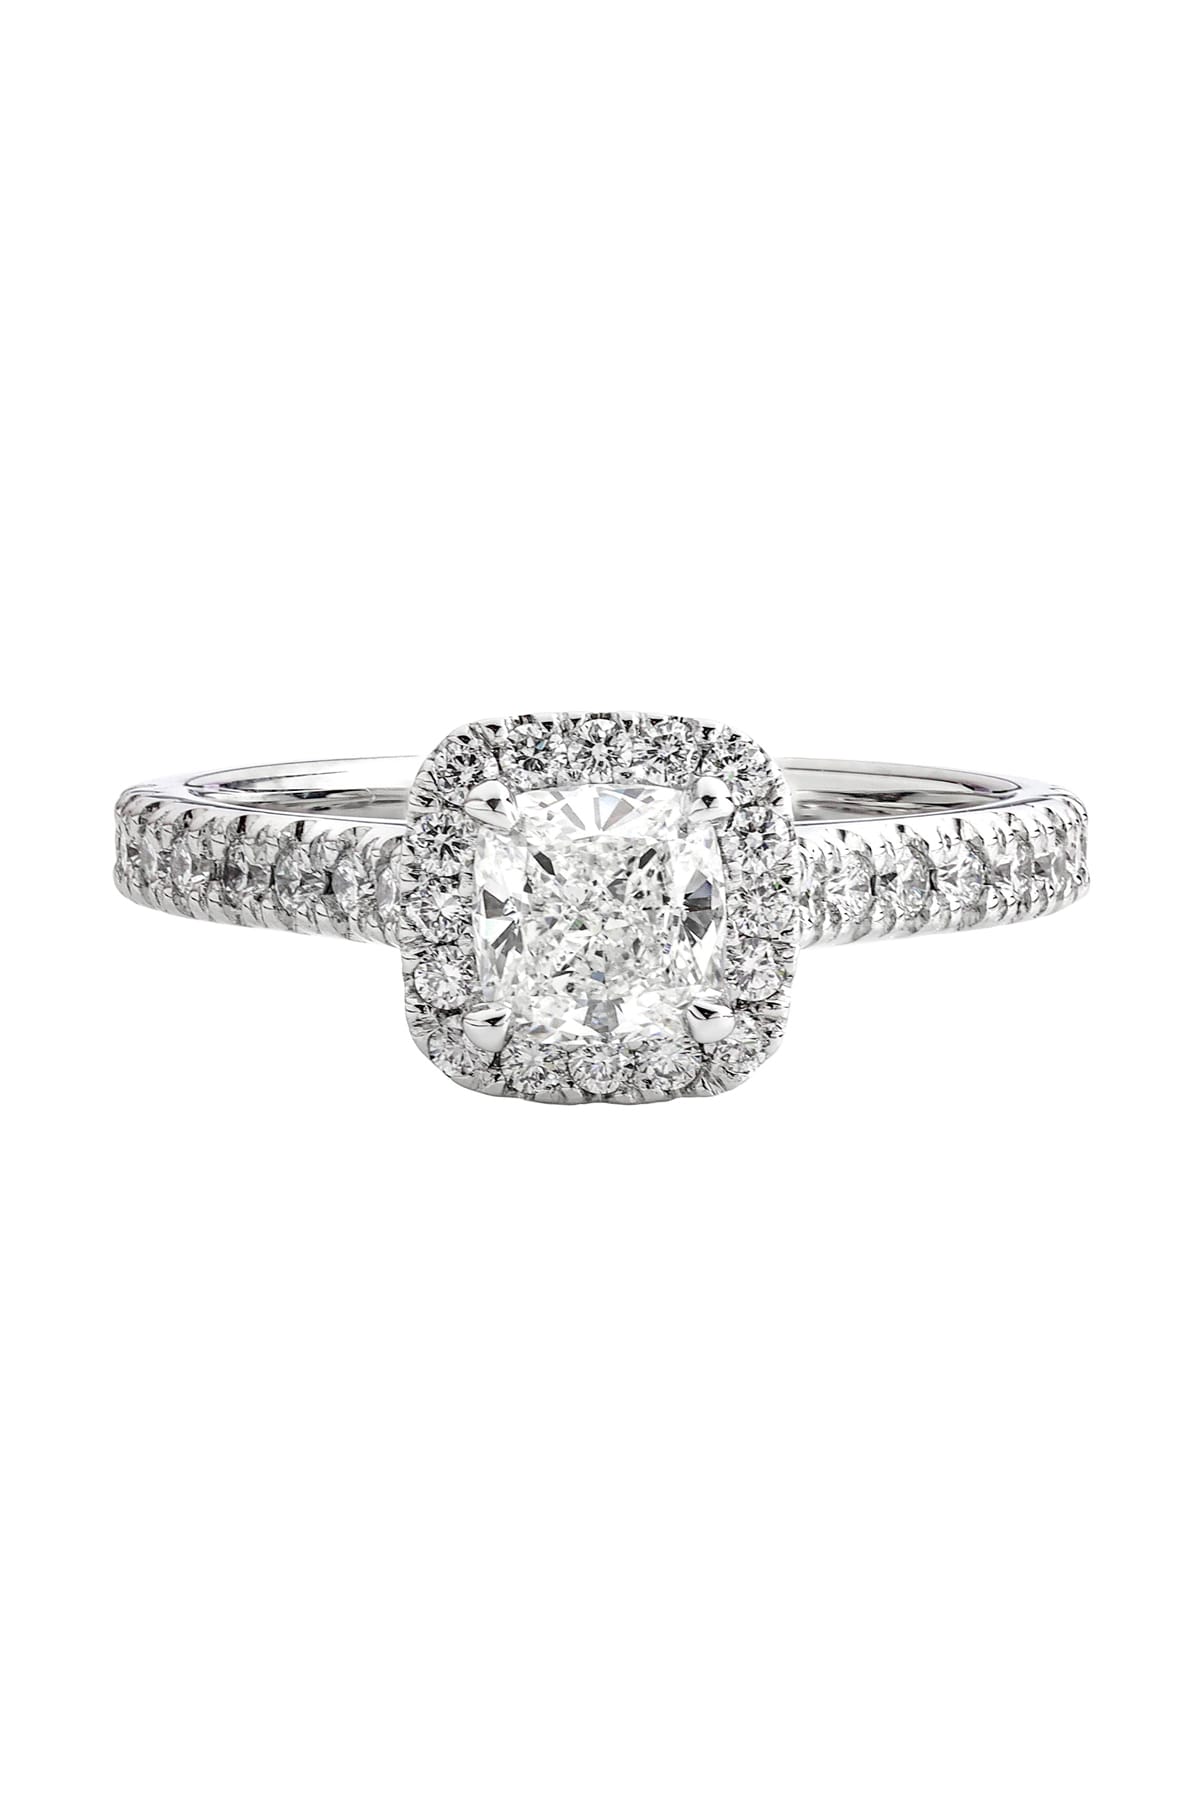 18 carat white gold 1.00ct Cushion Halo Diamond Engagement Ring from LeGassick Diamonds and Jewellery